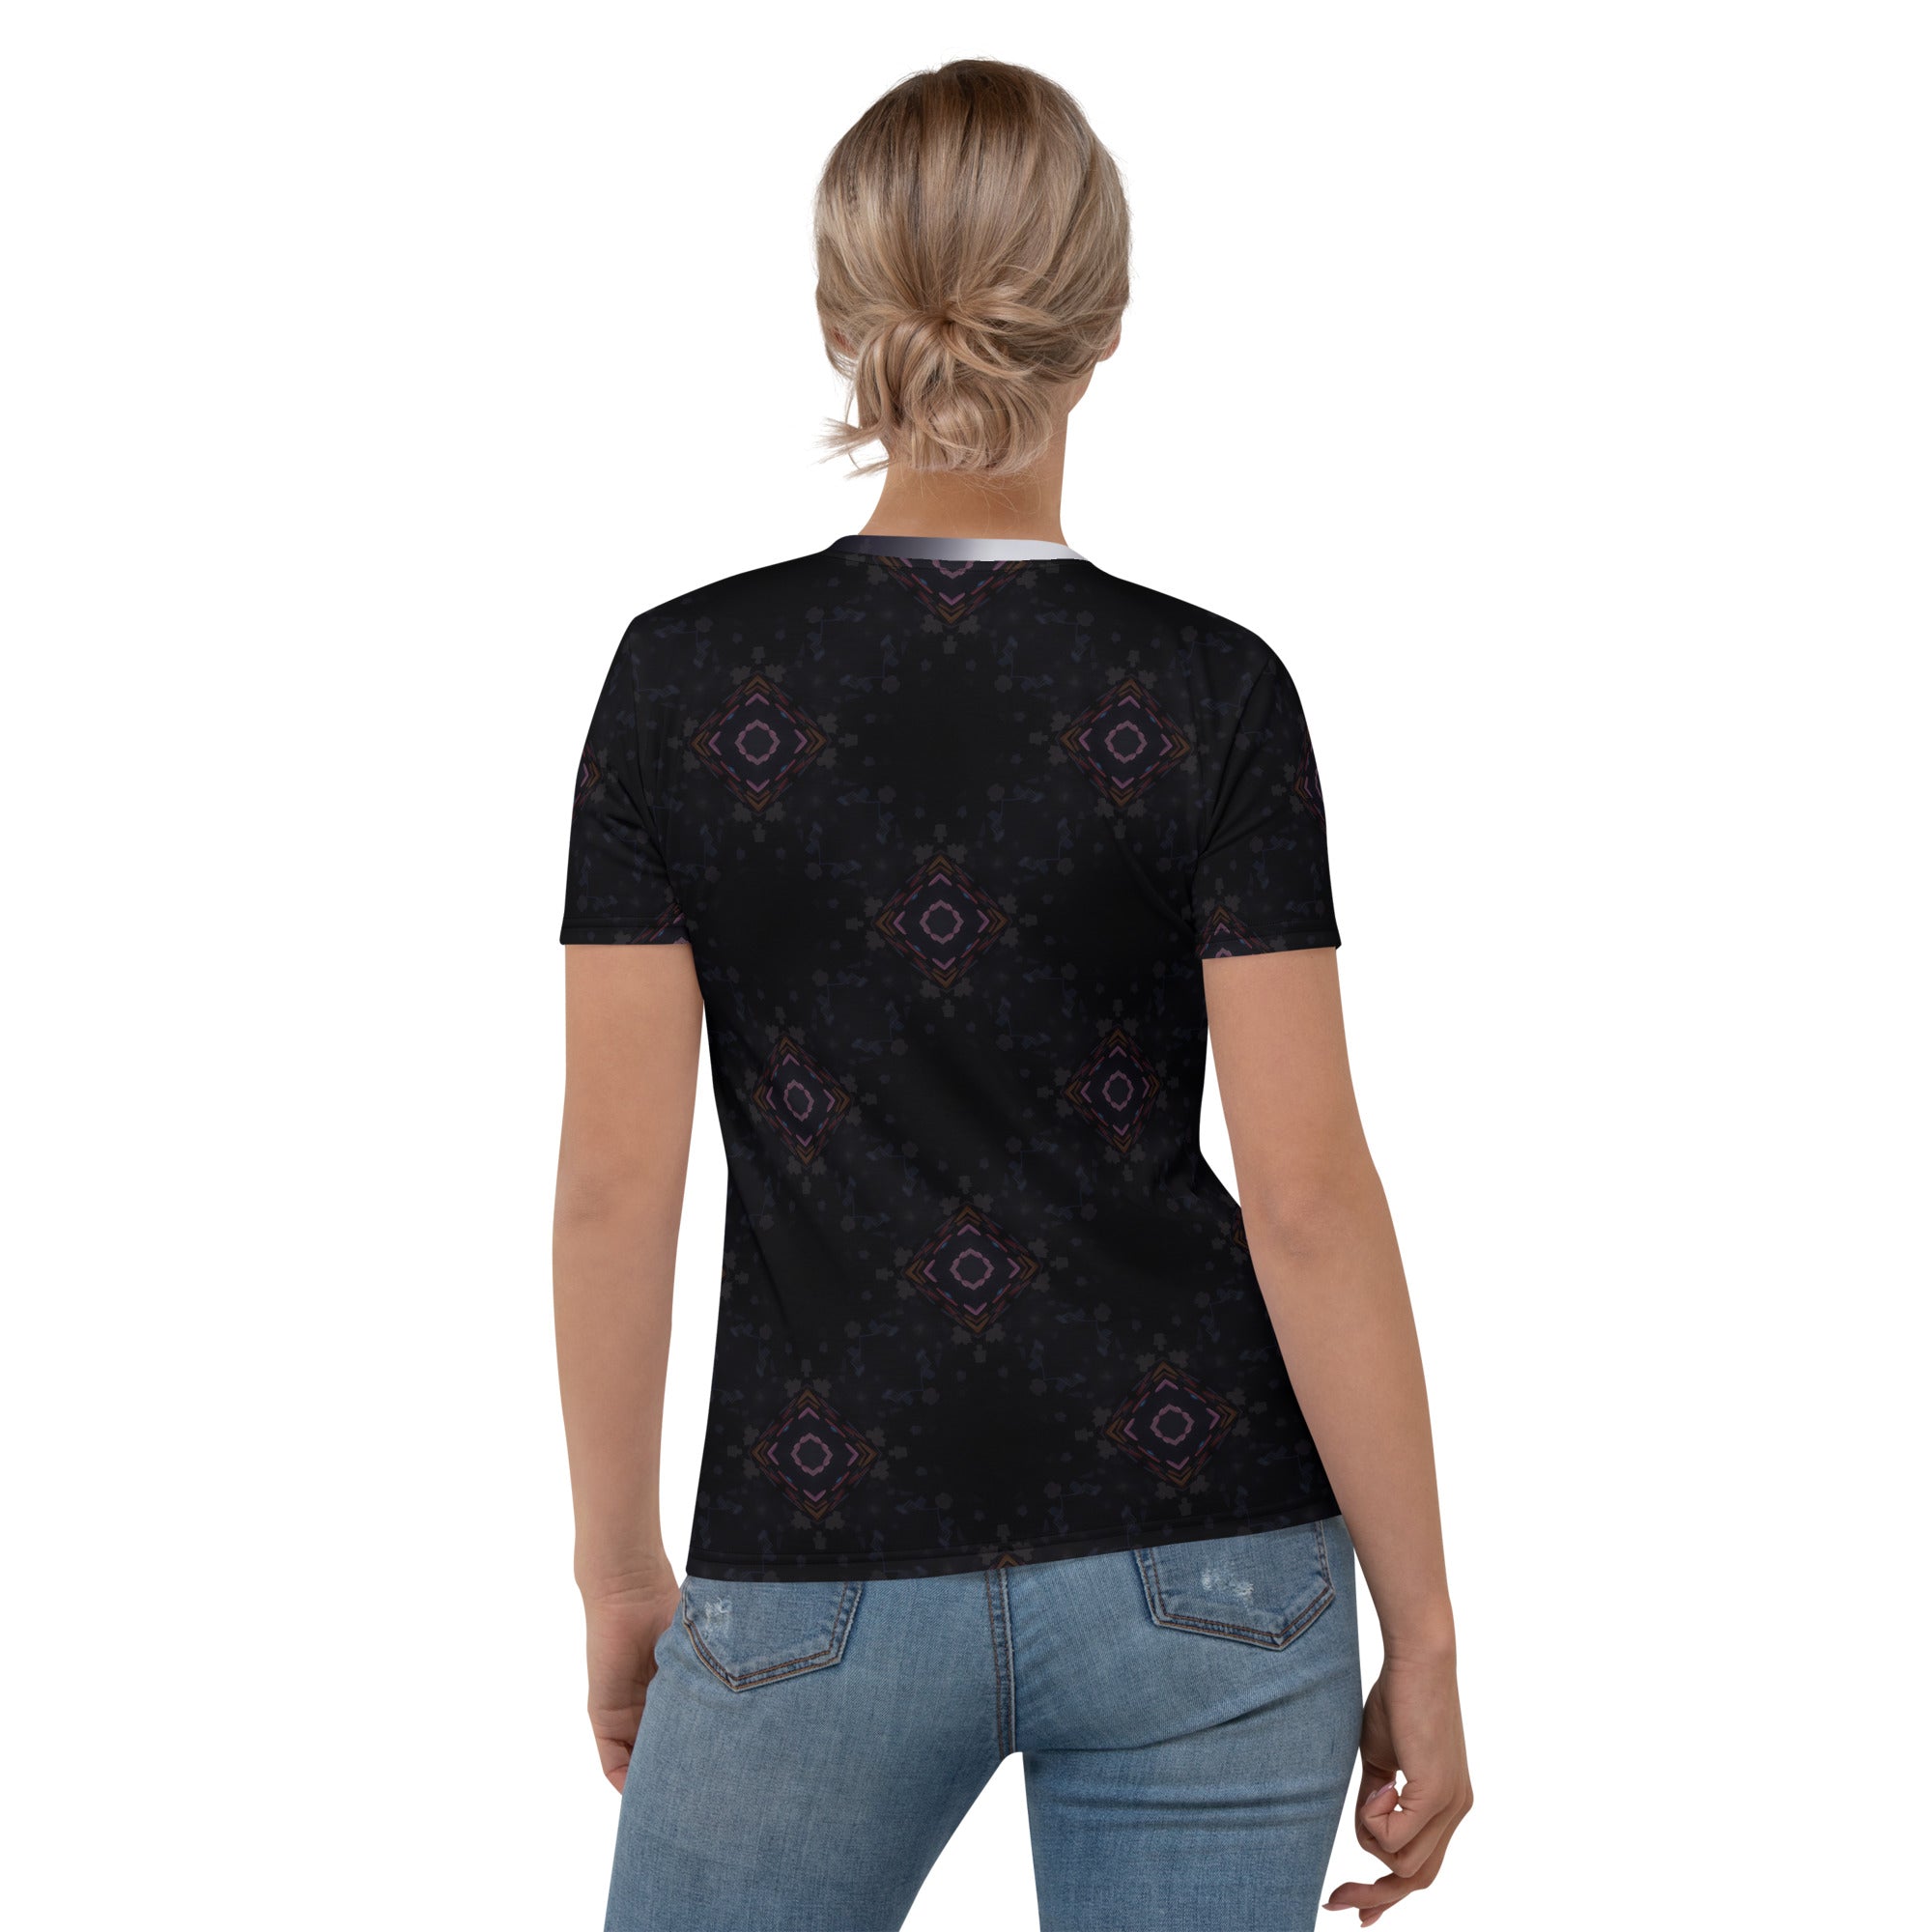 Cozy women's T-shirt featuring autumn leaves pattern.